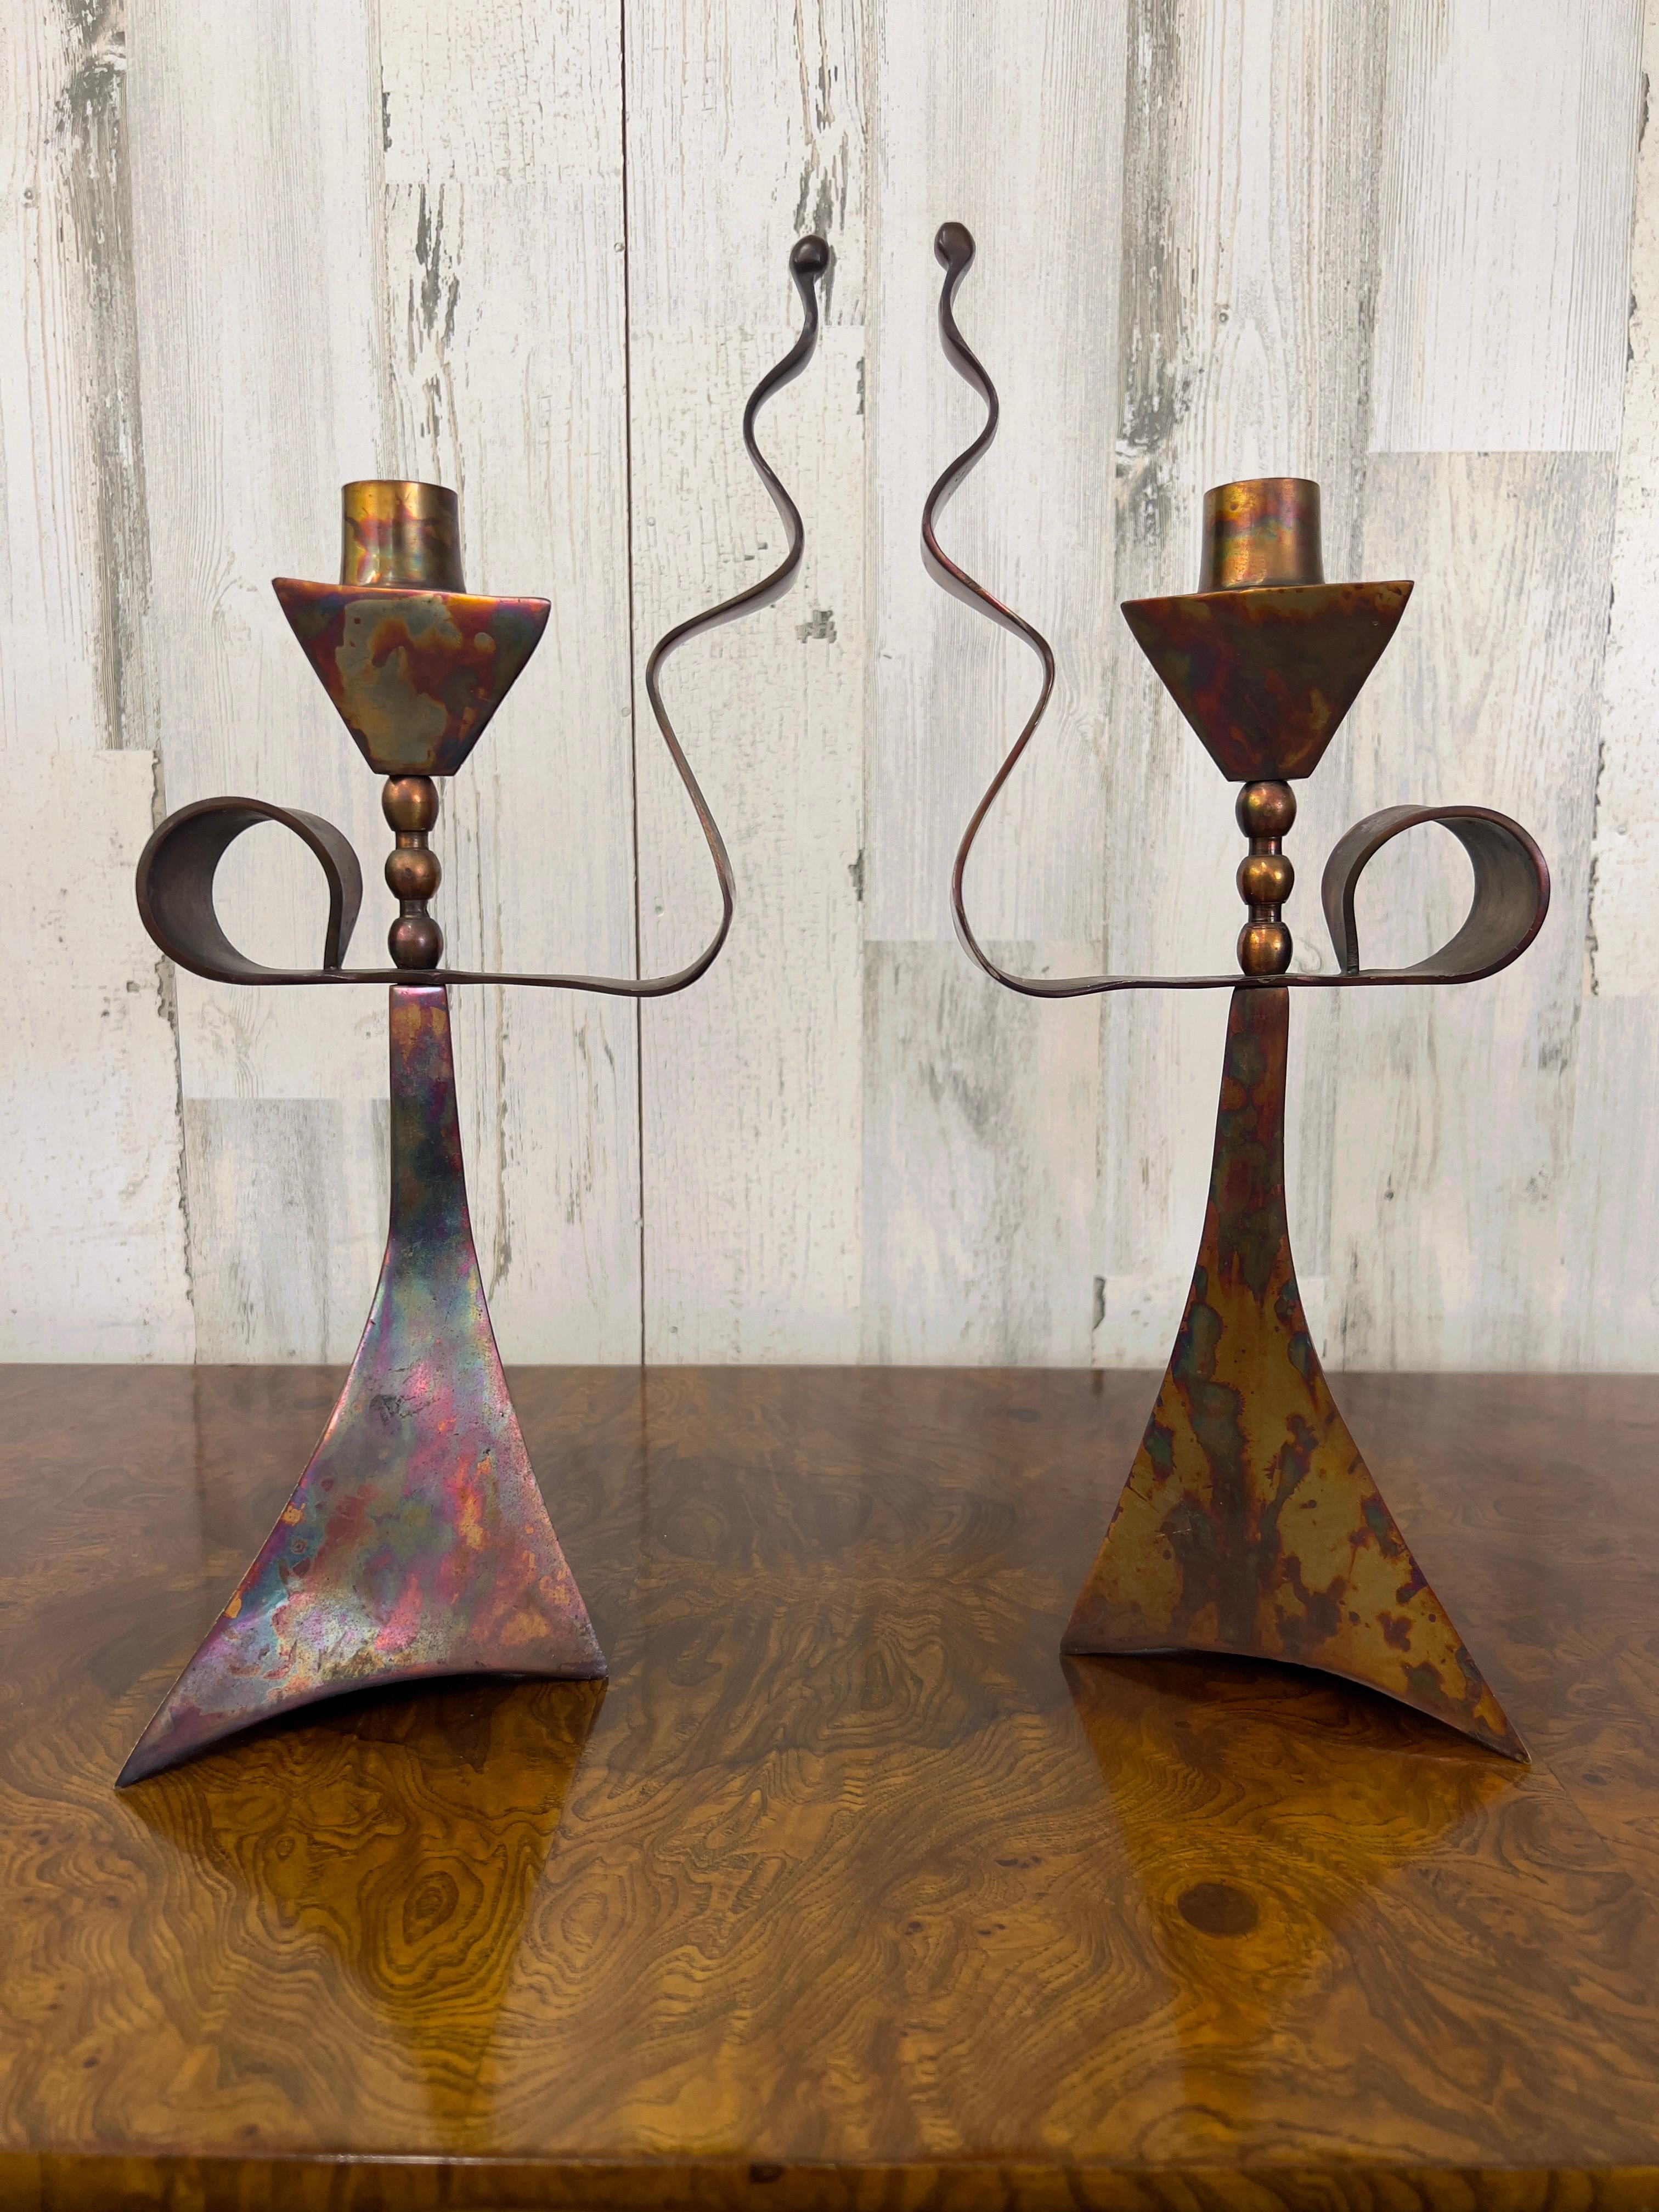 Whimsical triangular acid washed copper candlesticks with handle.